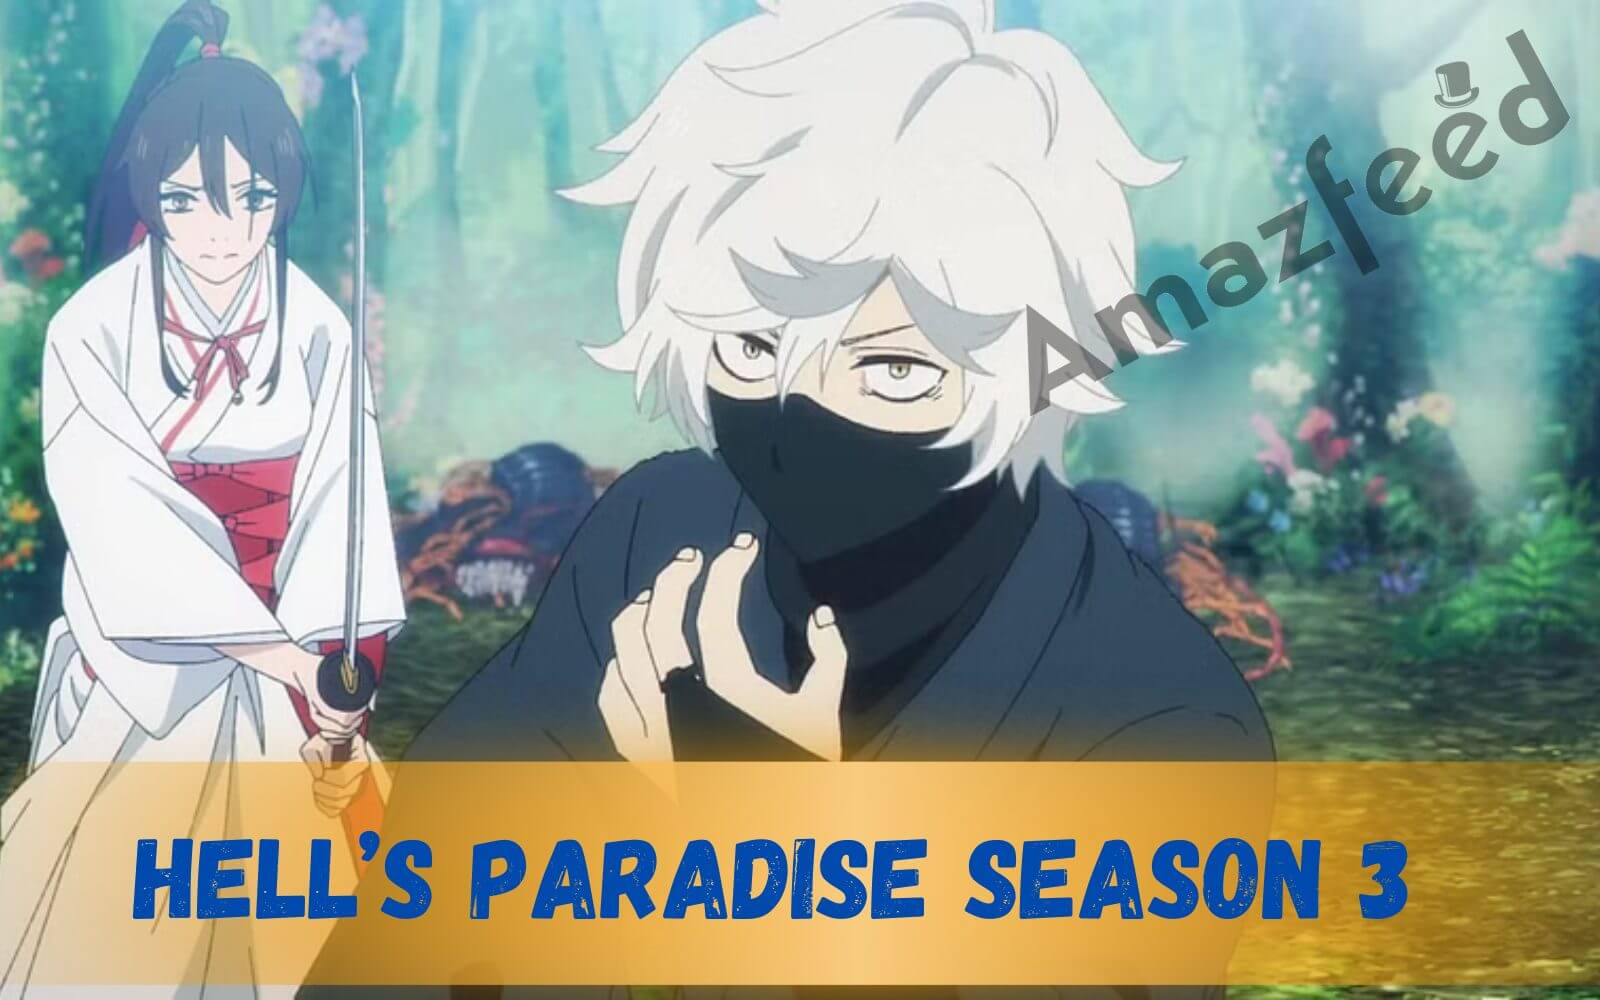 Hell's Paradise Season 3 Release Date, Trailer, Cast, Expectation